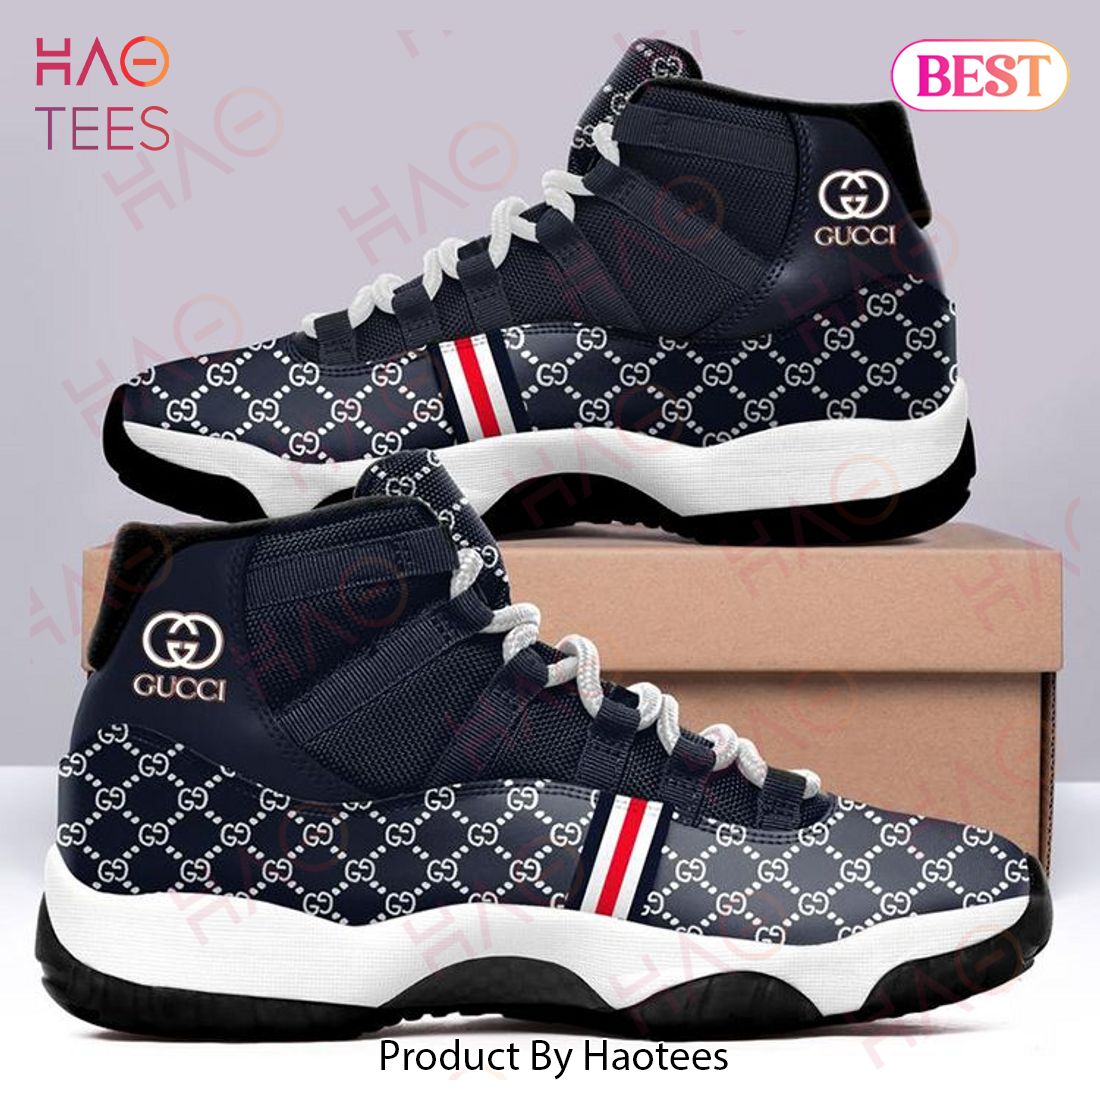 Luxury Gucci Blue Limited Air Jordan 11 Shoes Hot 2022 GC Sneakers Gifts For Men Women